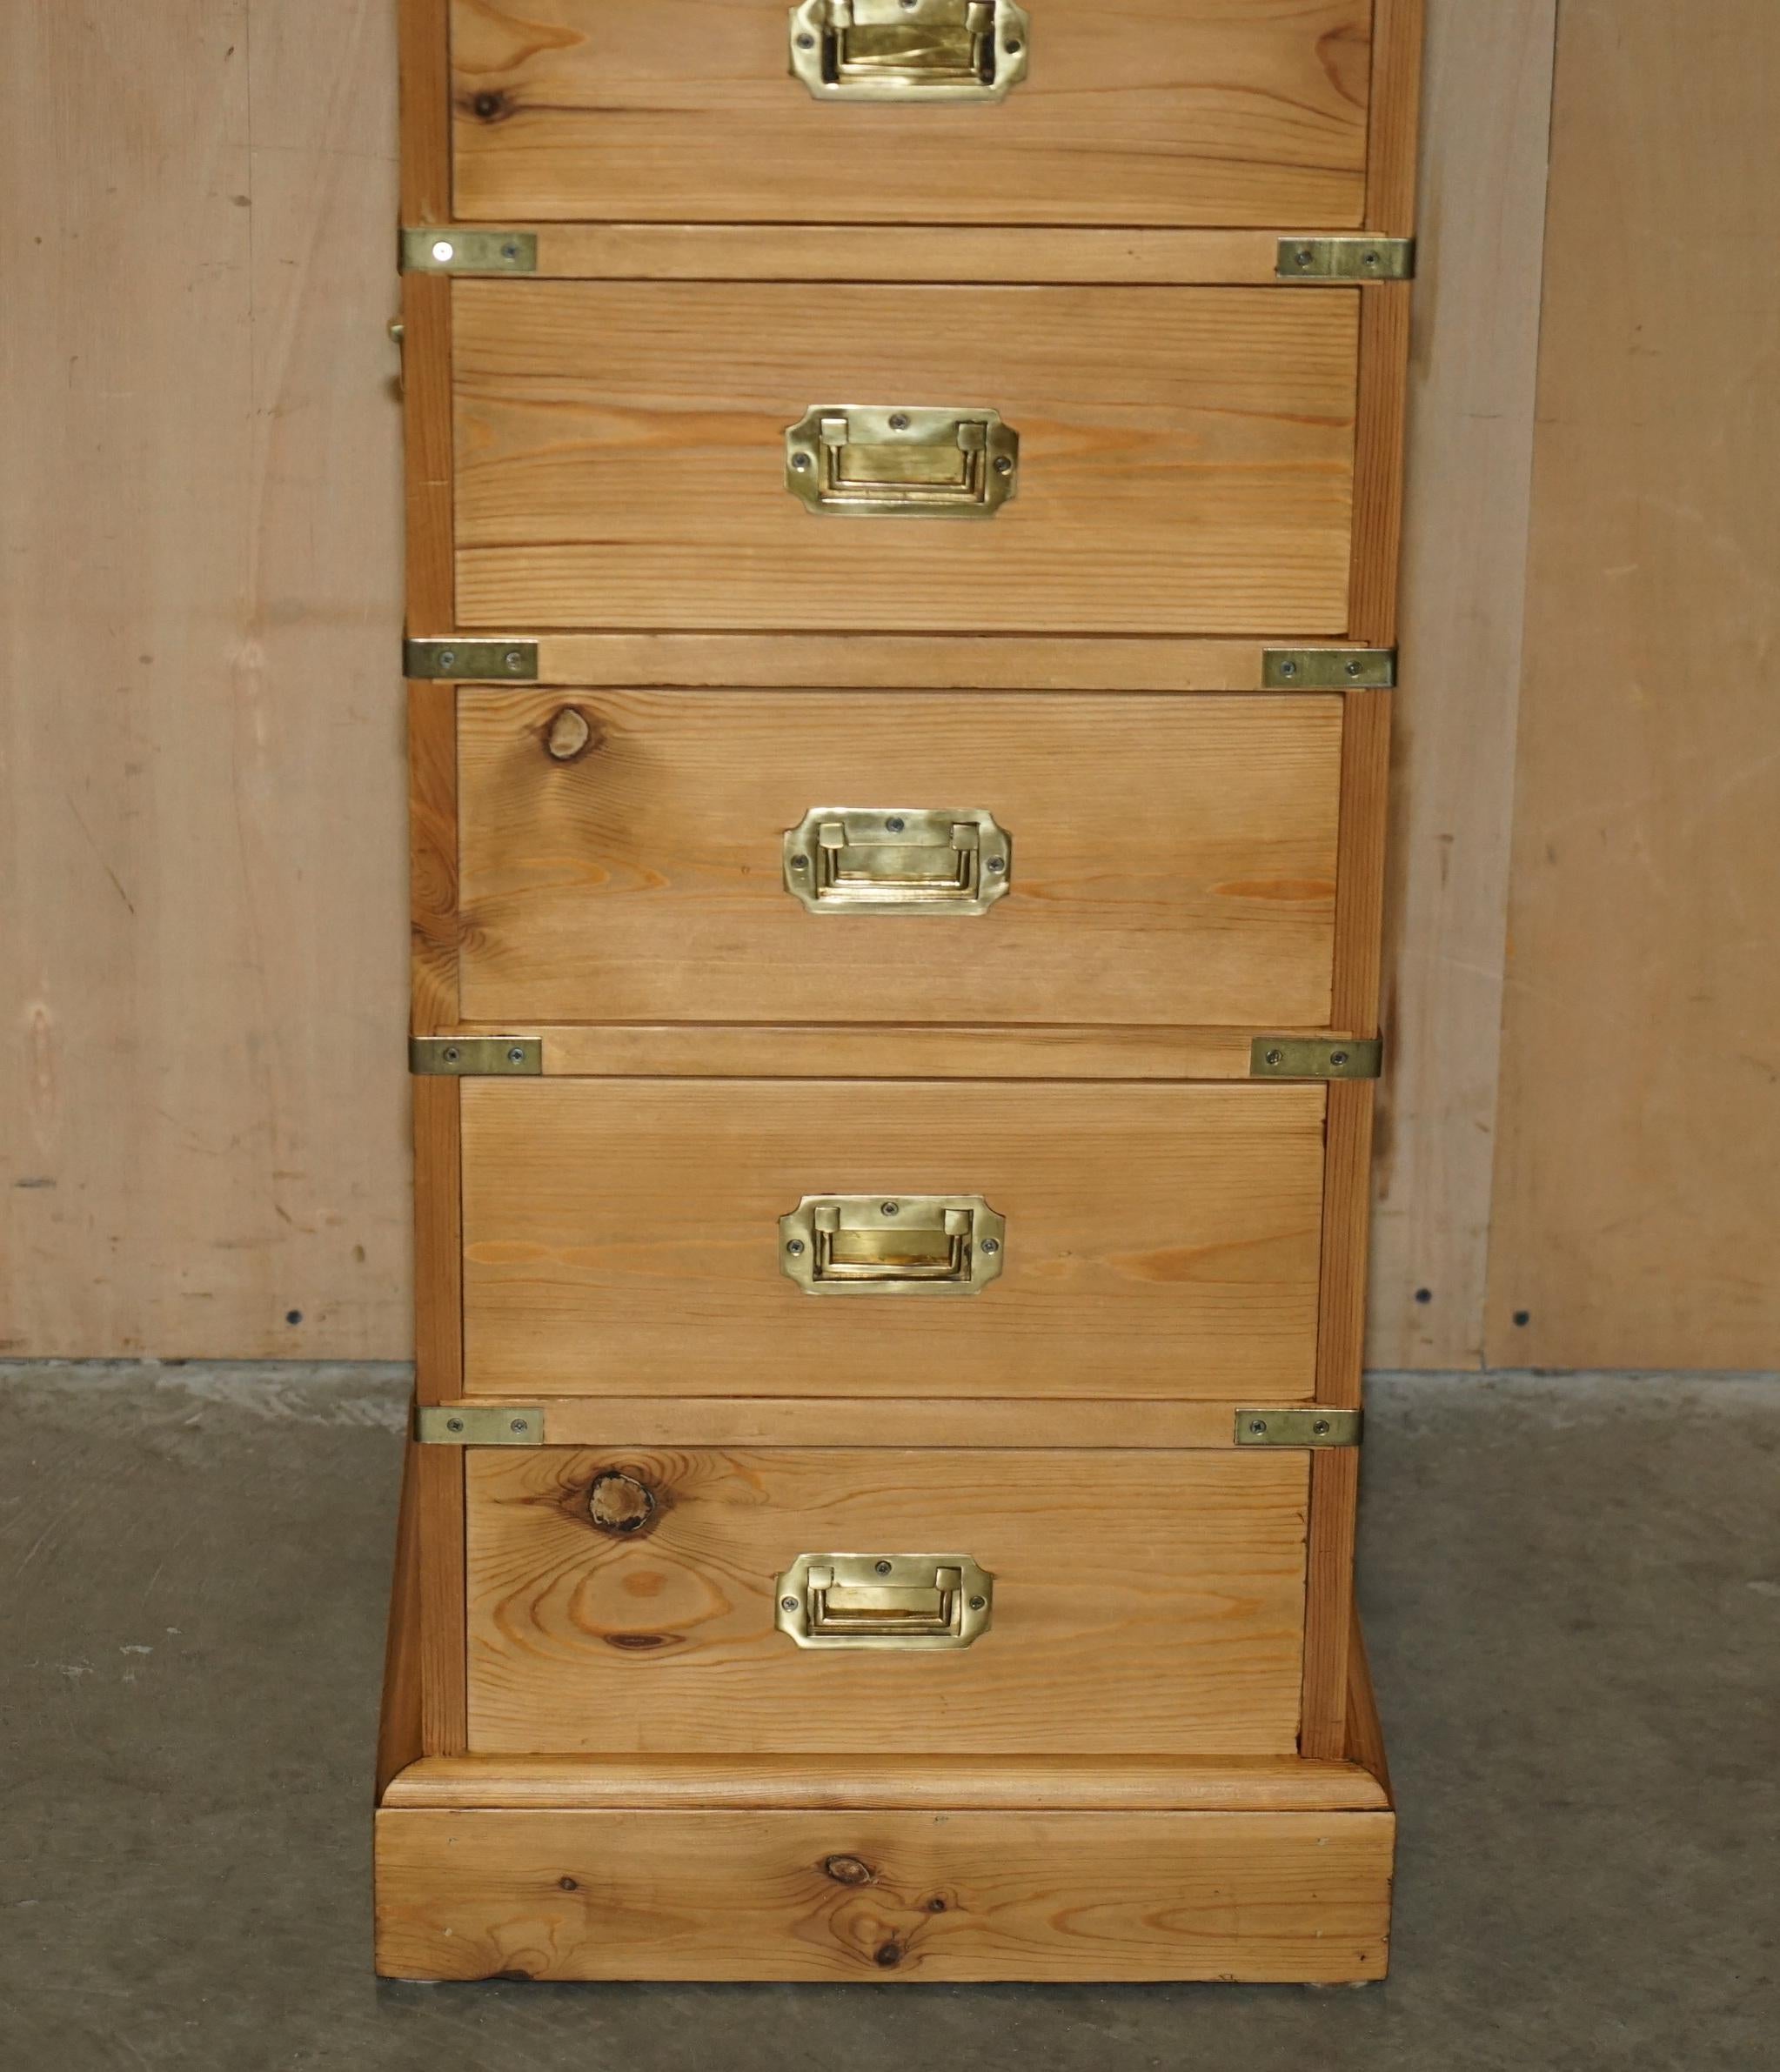 English RESTORED ViNTAGE ENGLISH PINE & BRASS MILITARY CAMPIGN TALLBOY CHEST OF DRAWERS For Sale